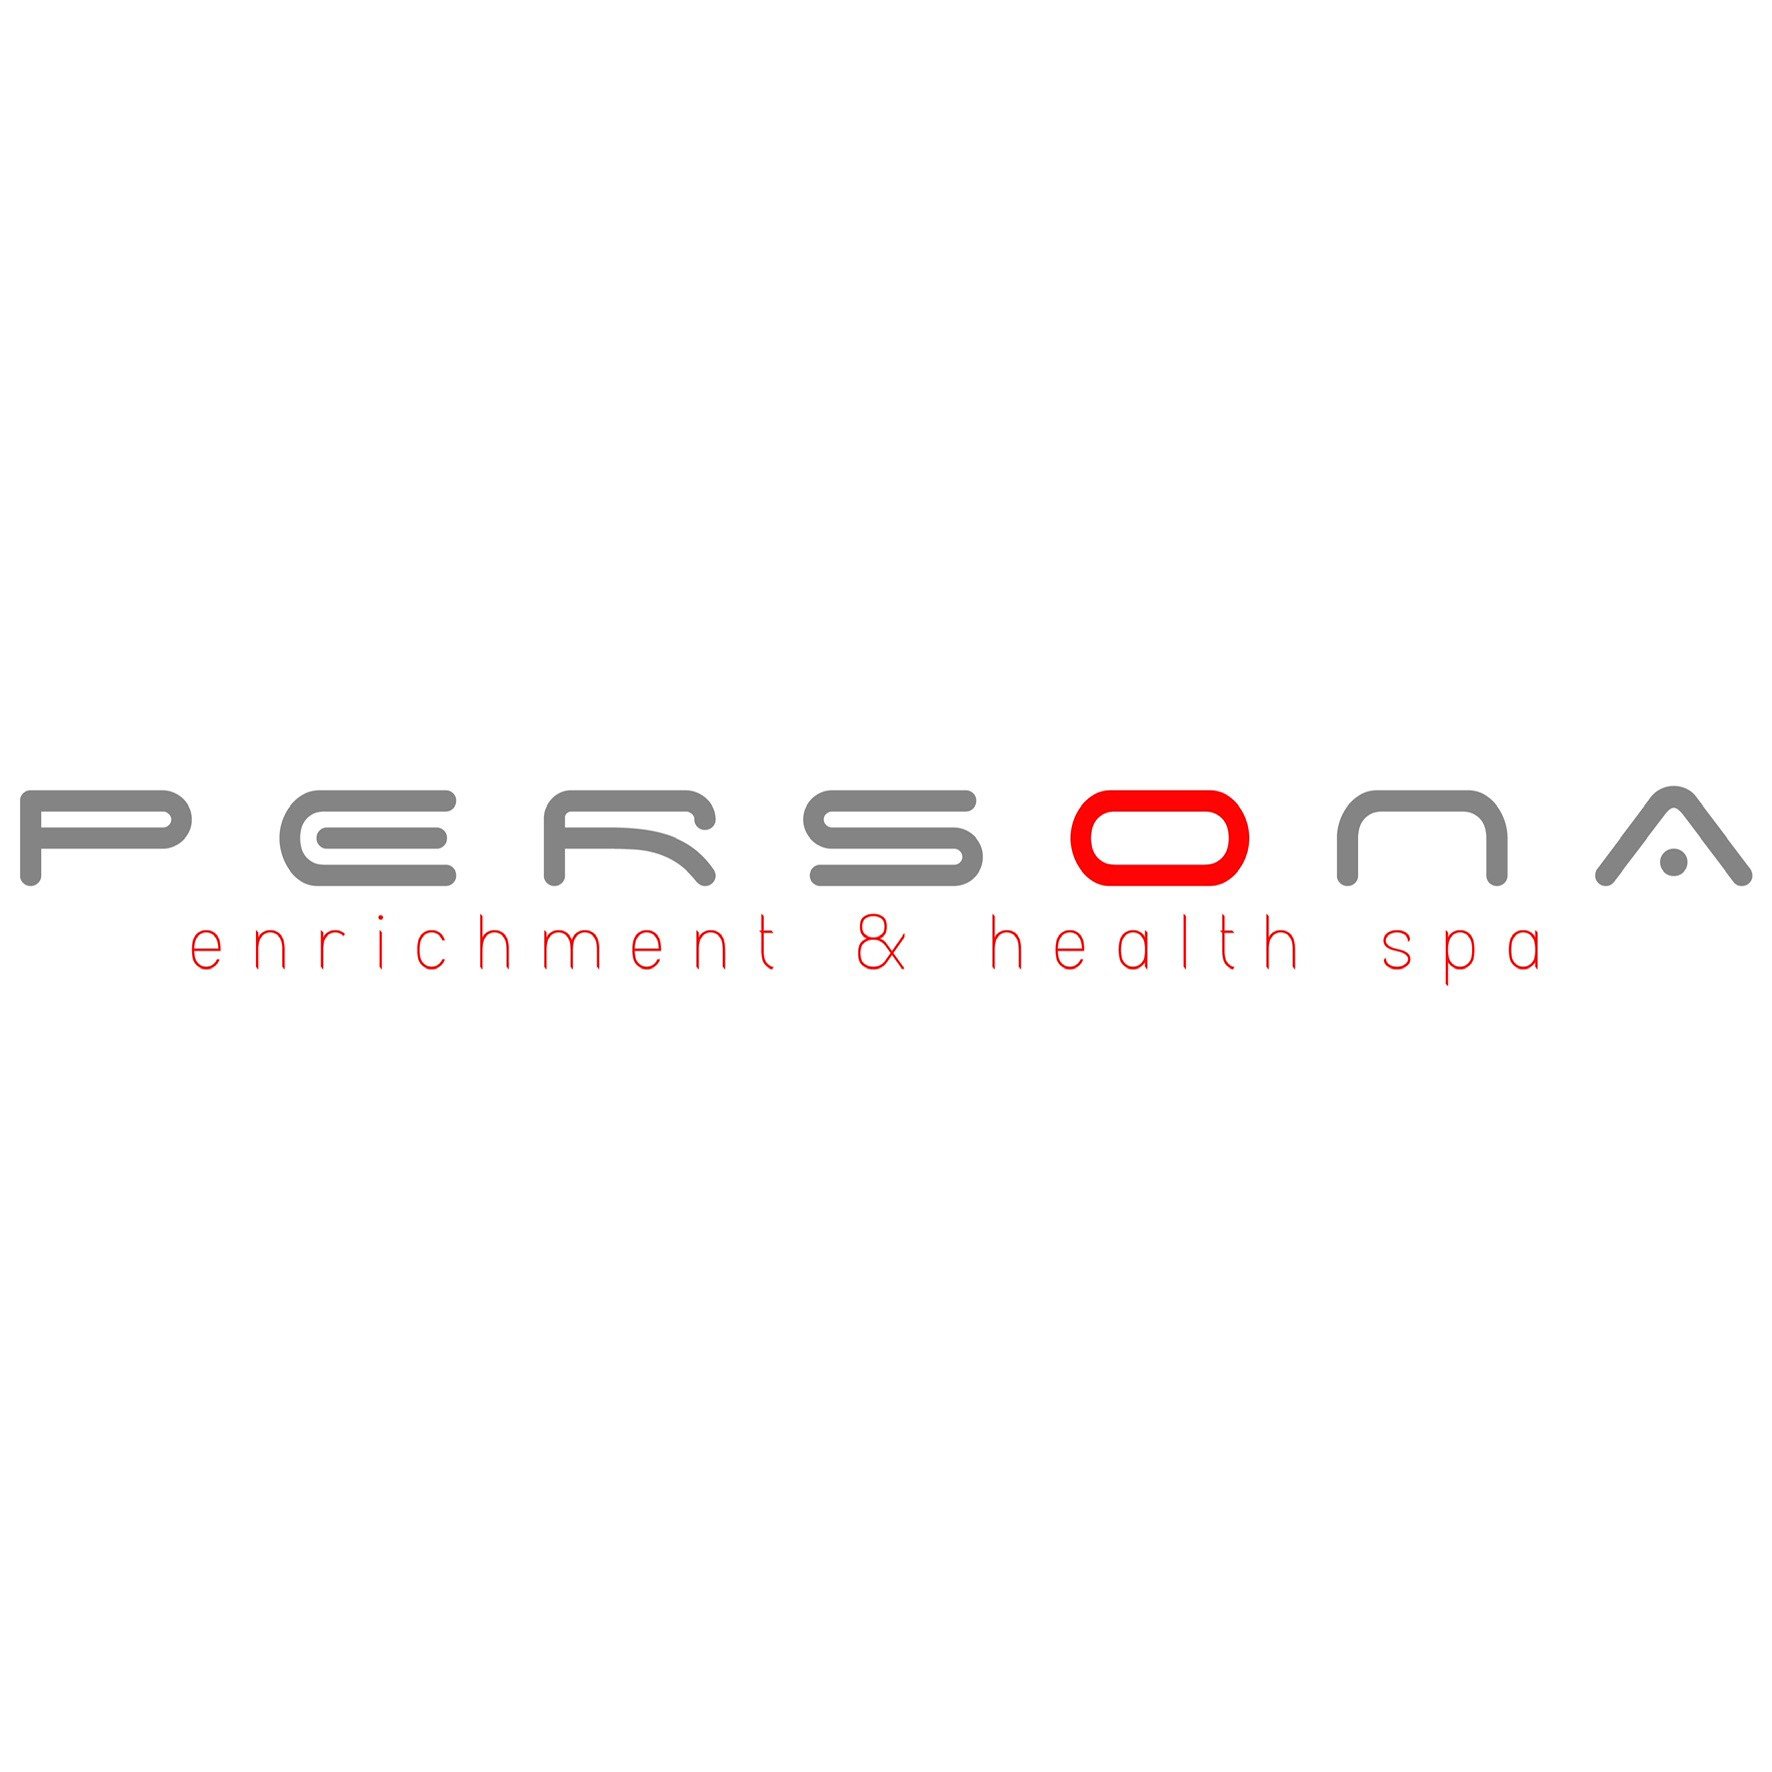 Persona Enrichment & Health Spa provides cosmetic services including body and face contouring, liposuction, skin tightening, scar removal, and much more